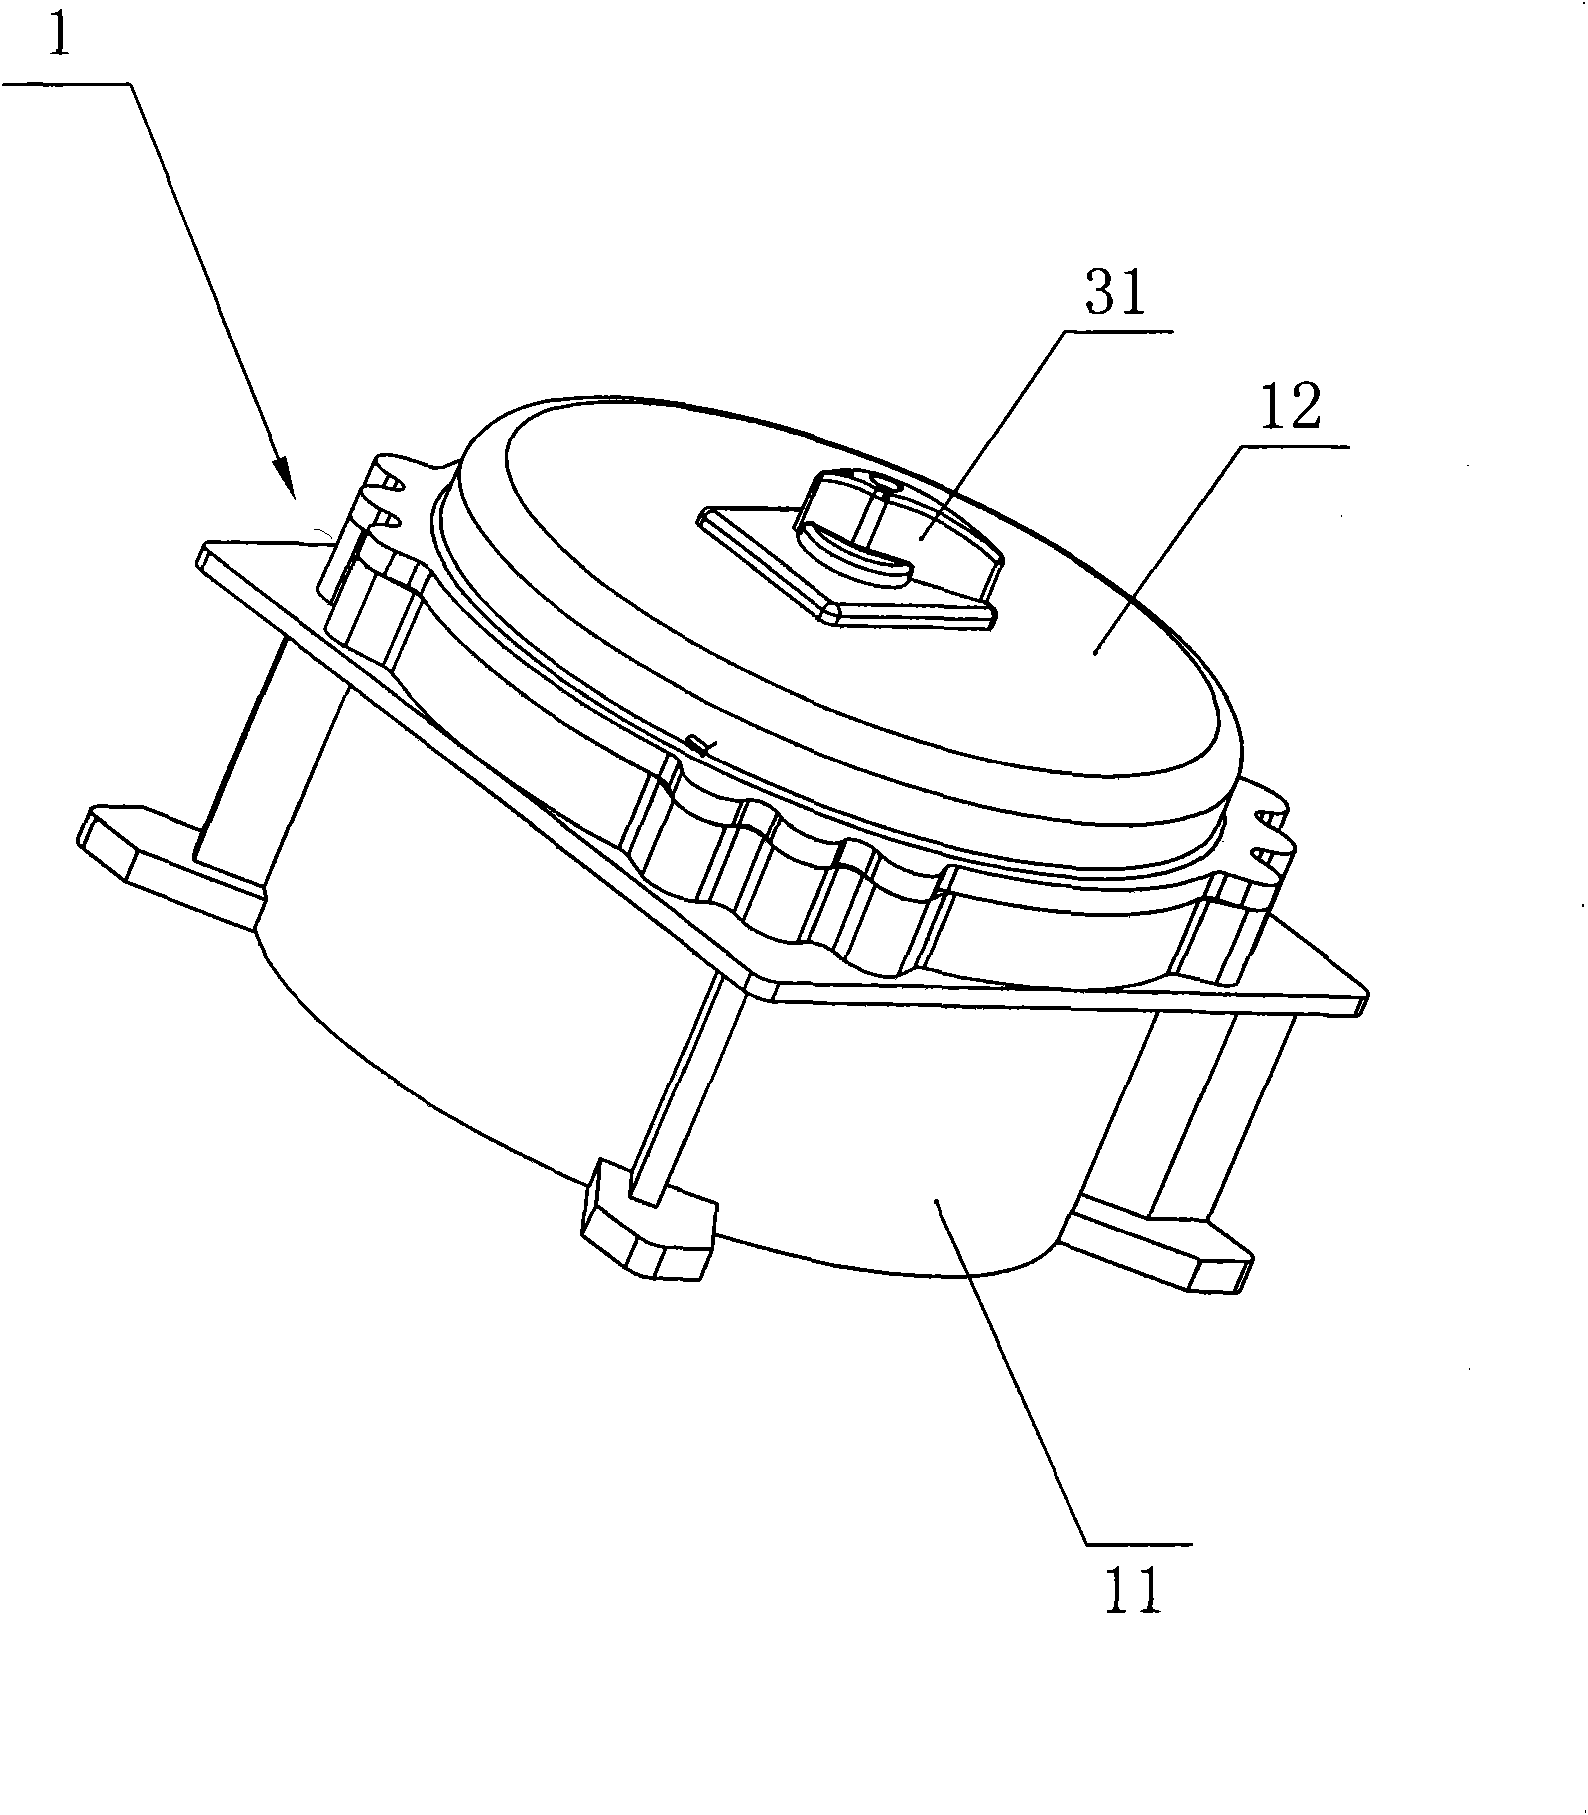 Operating mechanism for residual current circuit breaker in enclosed shell